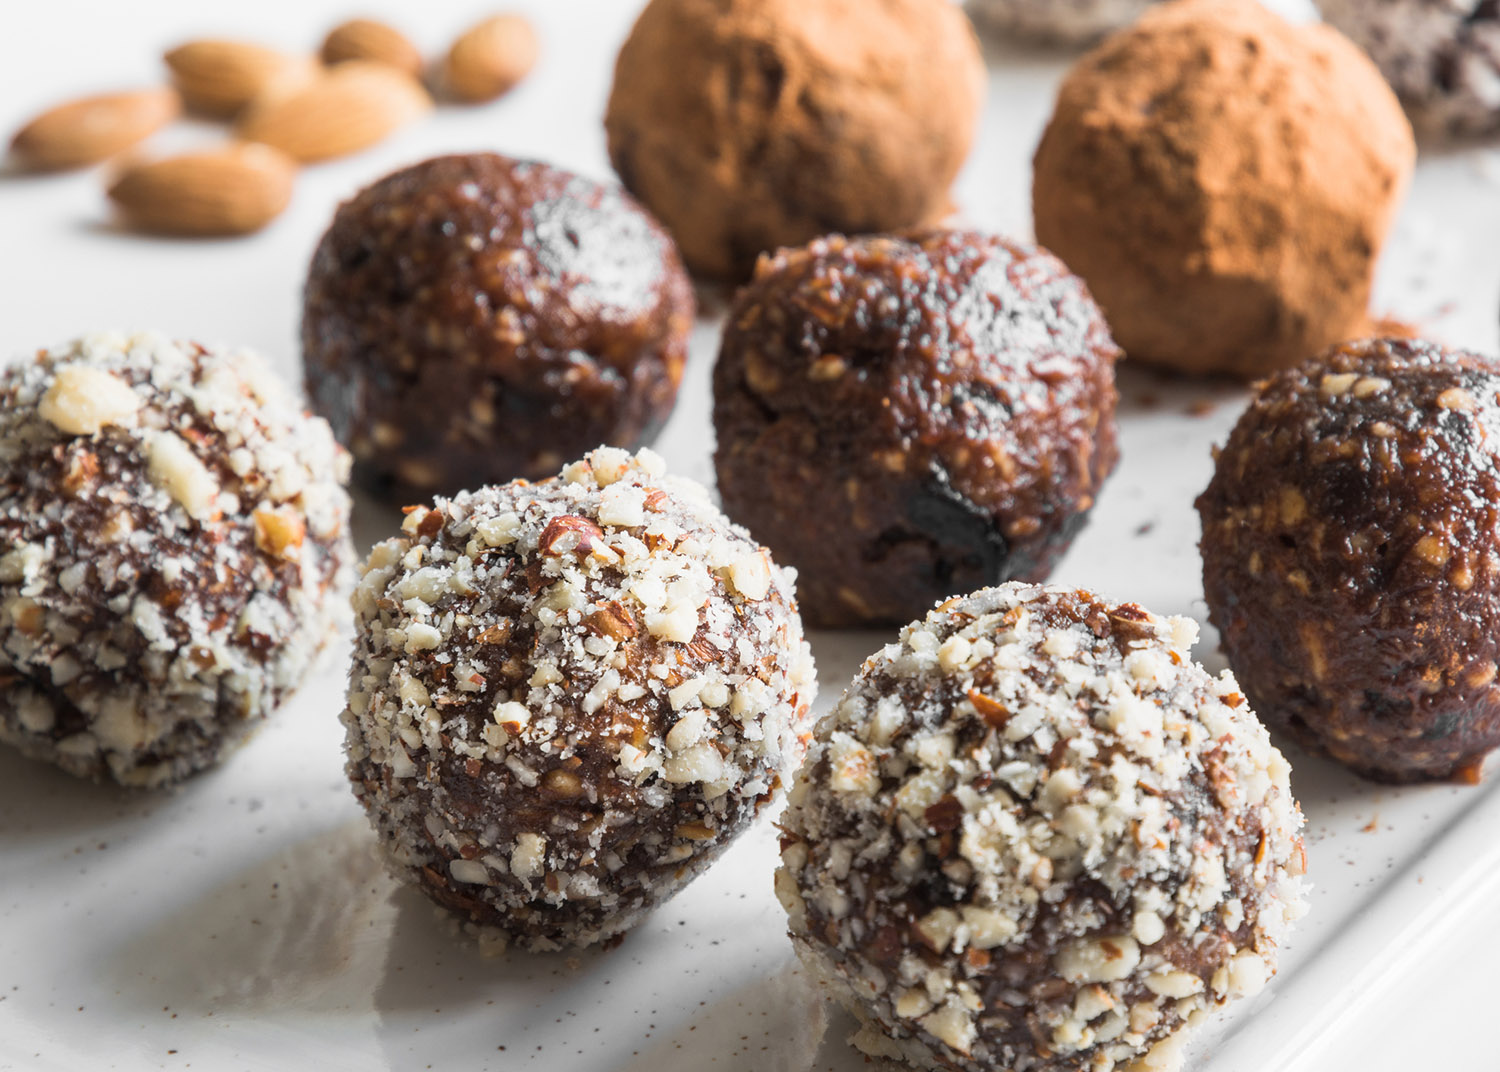 Homemade energy bites, vegan chocolate truffle with nuts, cacao and coconut flakes. Concept healthy food. Close up.